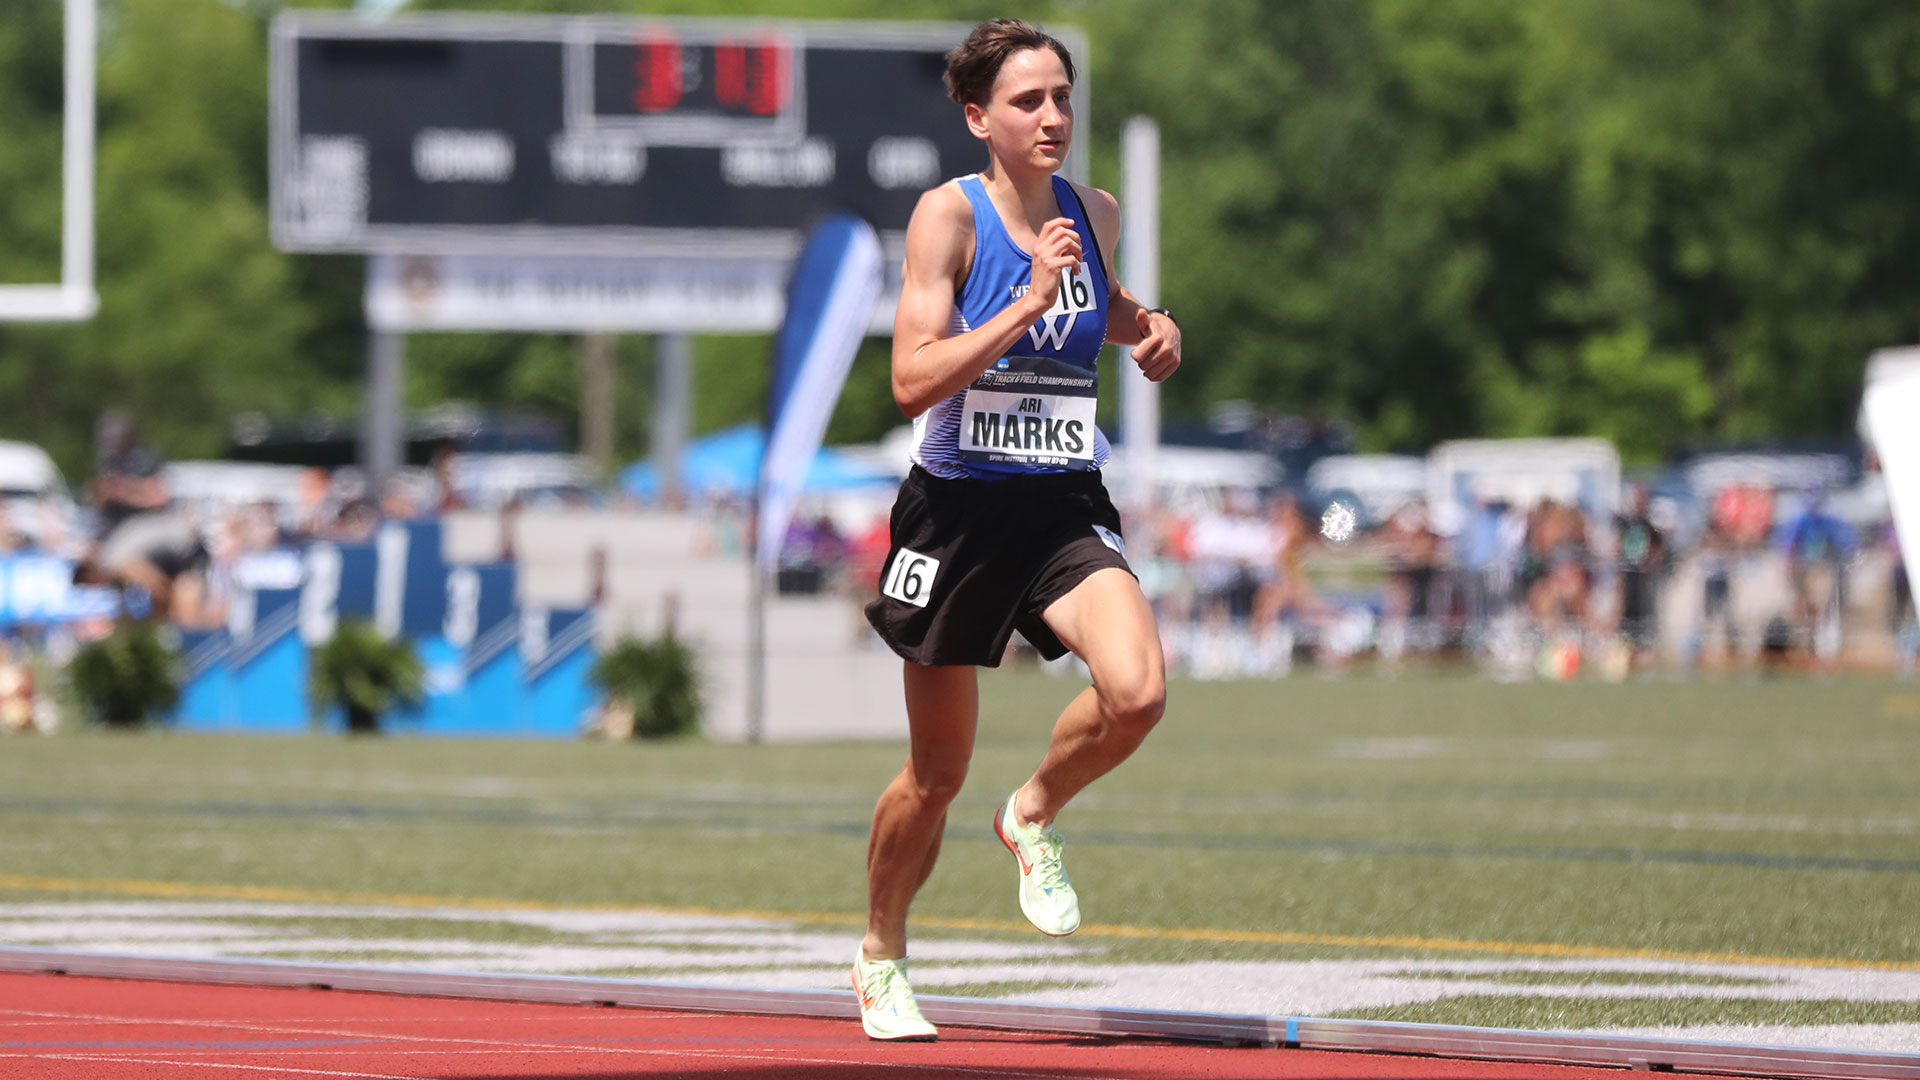 Ari Marks has been named the National Women&rsquo;s Track Athlete of the Year (d3photography.com).